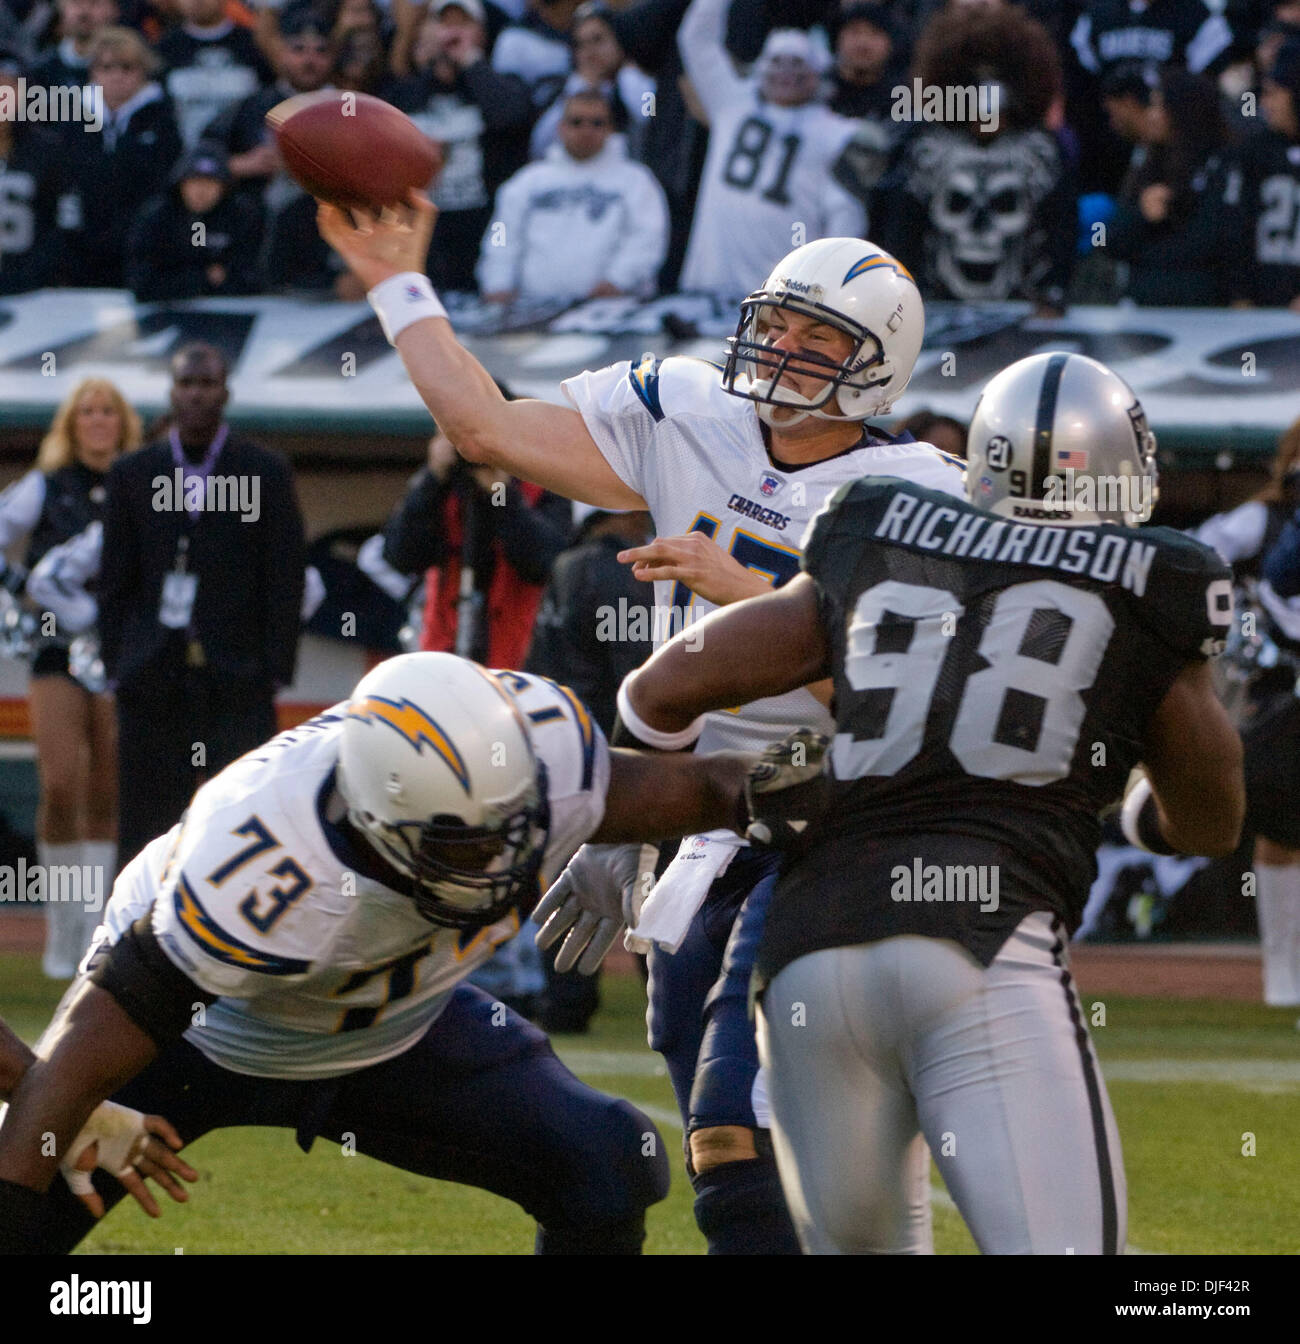 Dec 30, 2007 - OAKLAND, CA, USA - San Diego Chargers quarterback PHILIP RIVERS #17 throws a pass while offensive tackle MARCUS MCNEILL #73 blocks Oakland Raiders defensive end JAY RICHARDSON #98 during their game at McAfee Coliseum. (Credit Image: © Al Golub/ZUMApress.com) Stock Photo